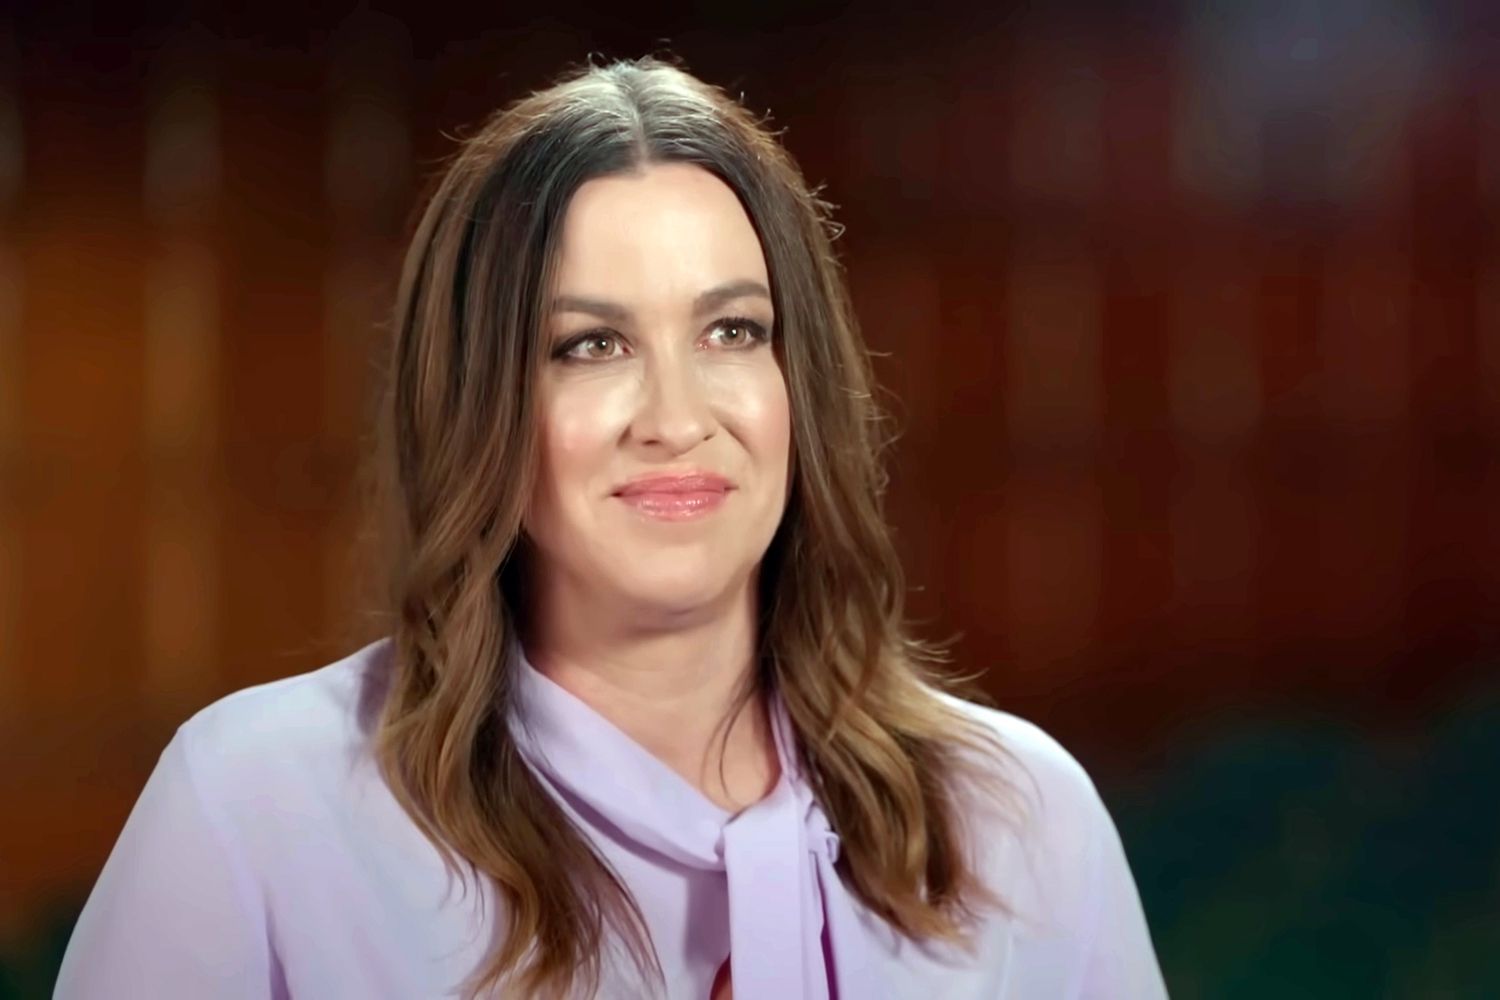 Alanis Morrisette is featured on a recent episode of the PBS show "Finding Your Roots." (Video screen grab via PBS)